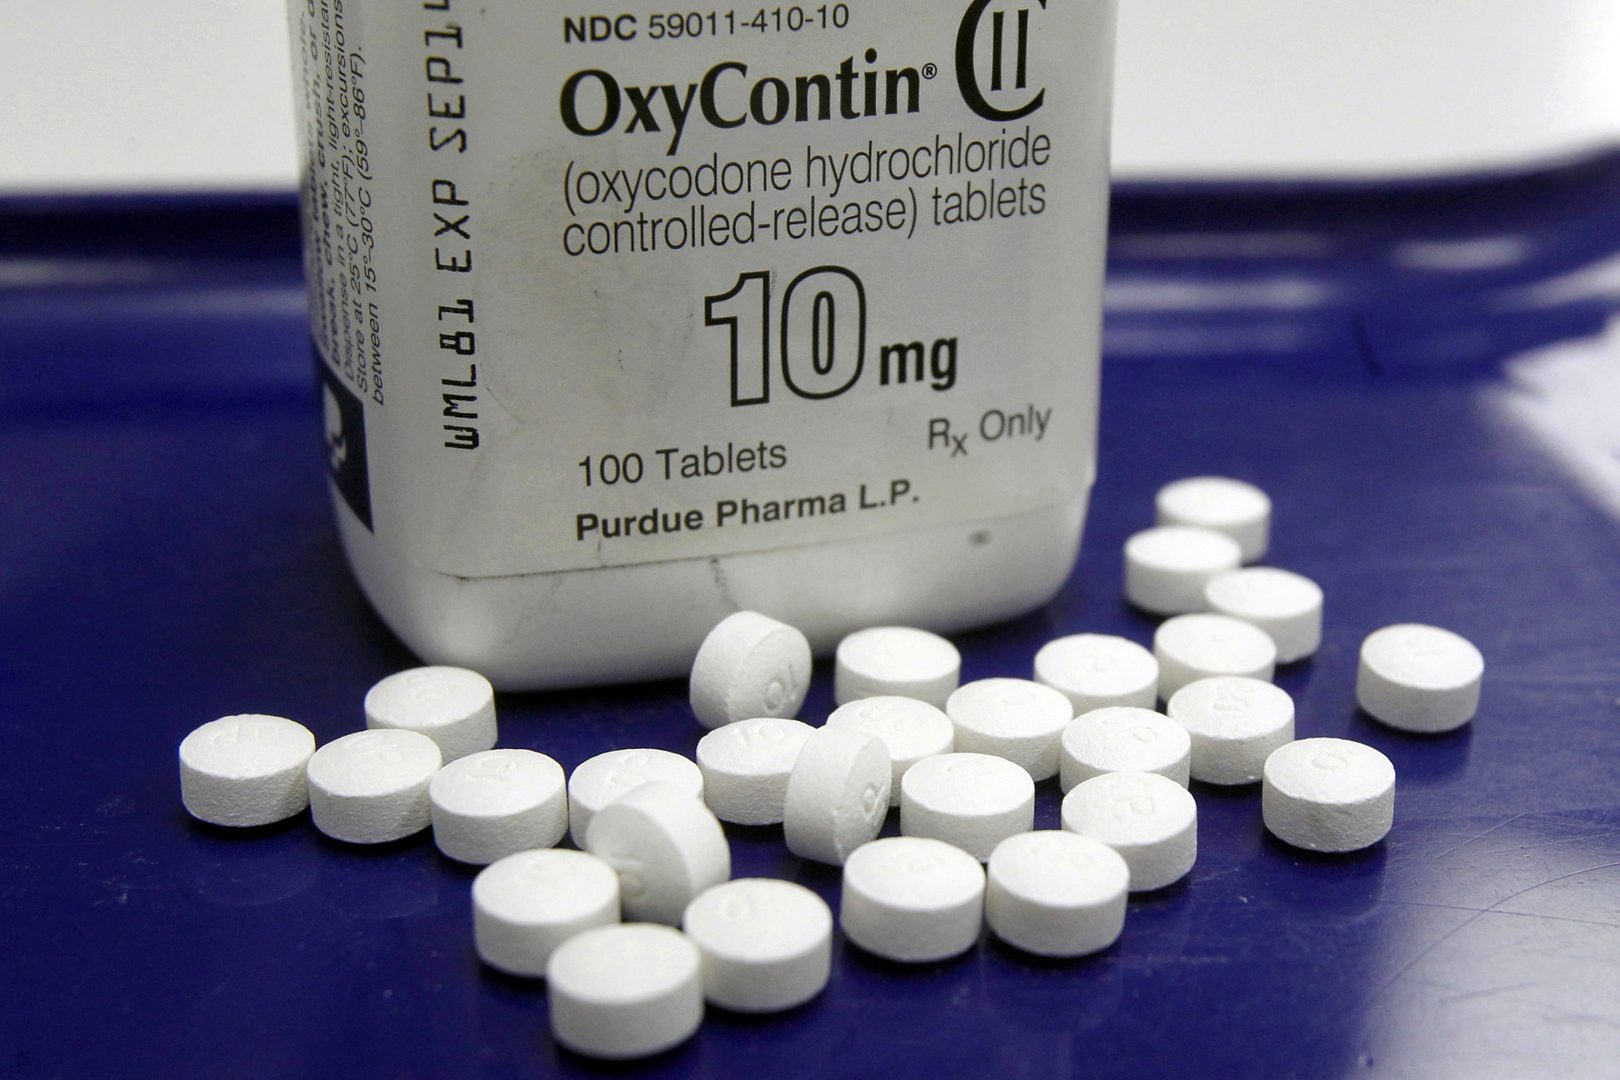 FILE PHOTO: This Feb. 19, 2013, file photo shows OxyContin pills arranged for a photo at a pharmacy in Montpelier, Vt.